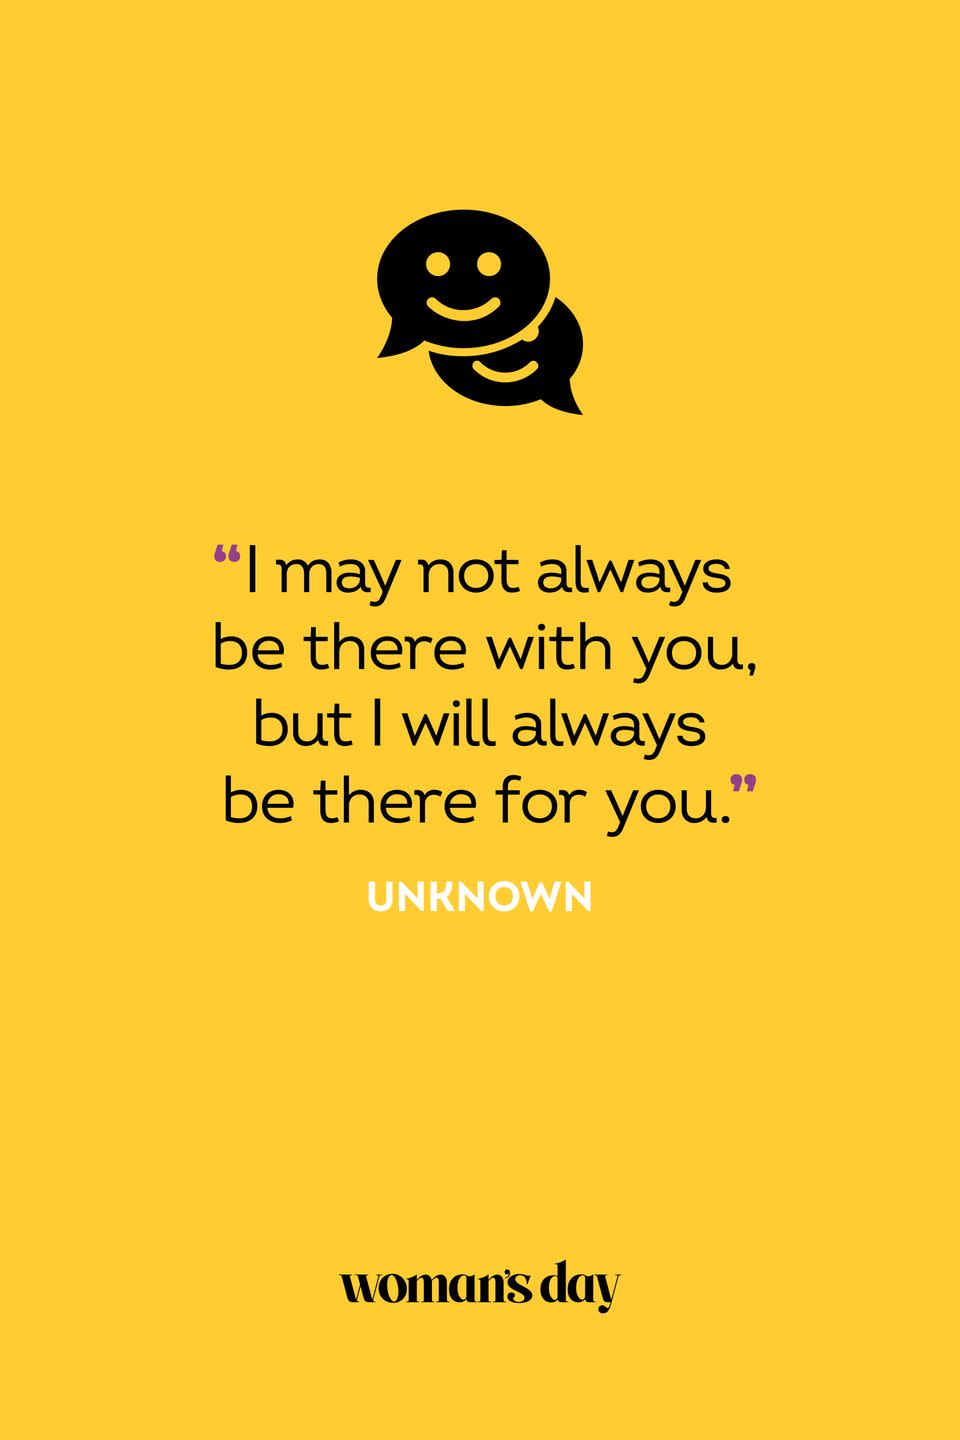 <p>"I may not always be there with you, but I will always be there for you."</p>